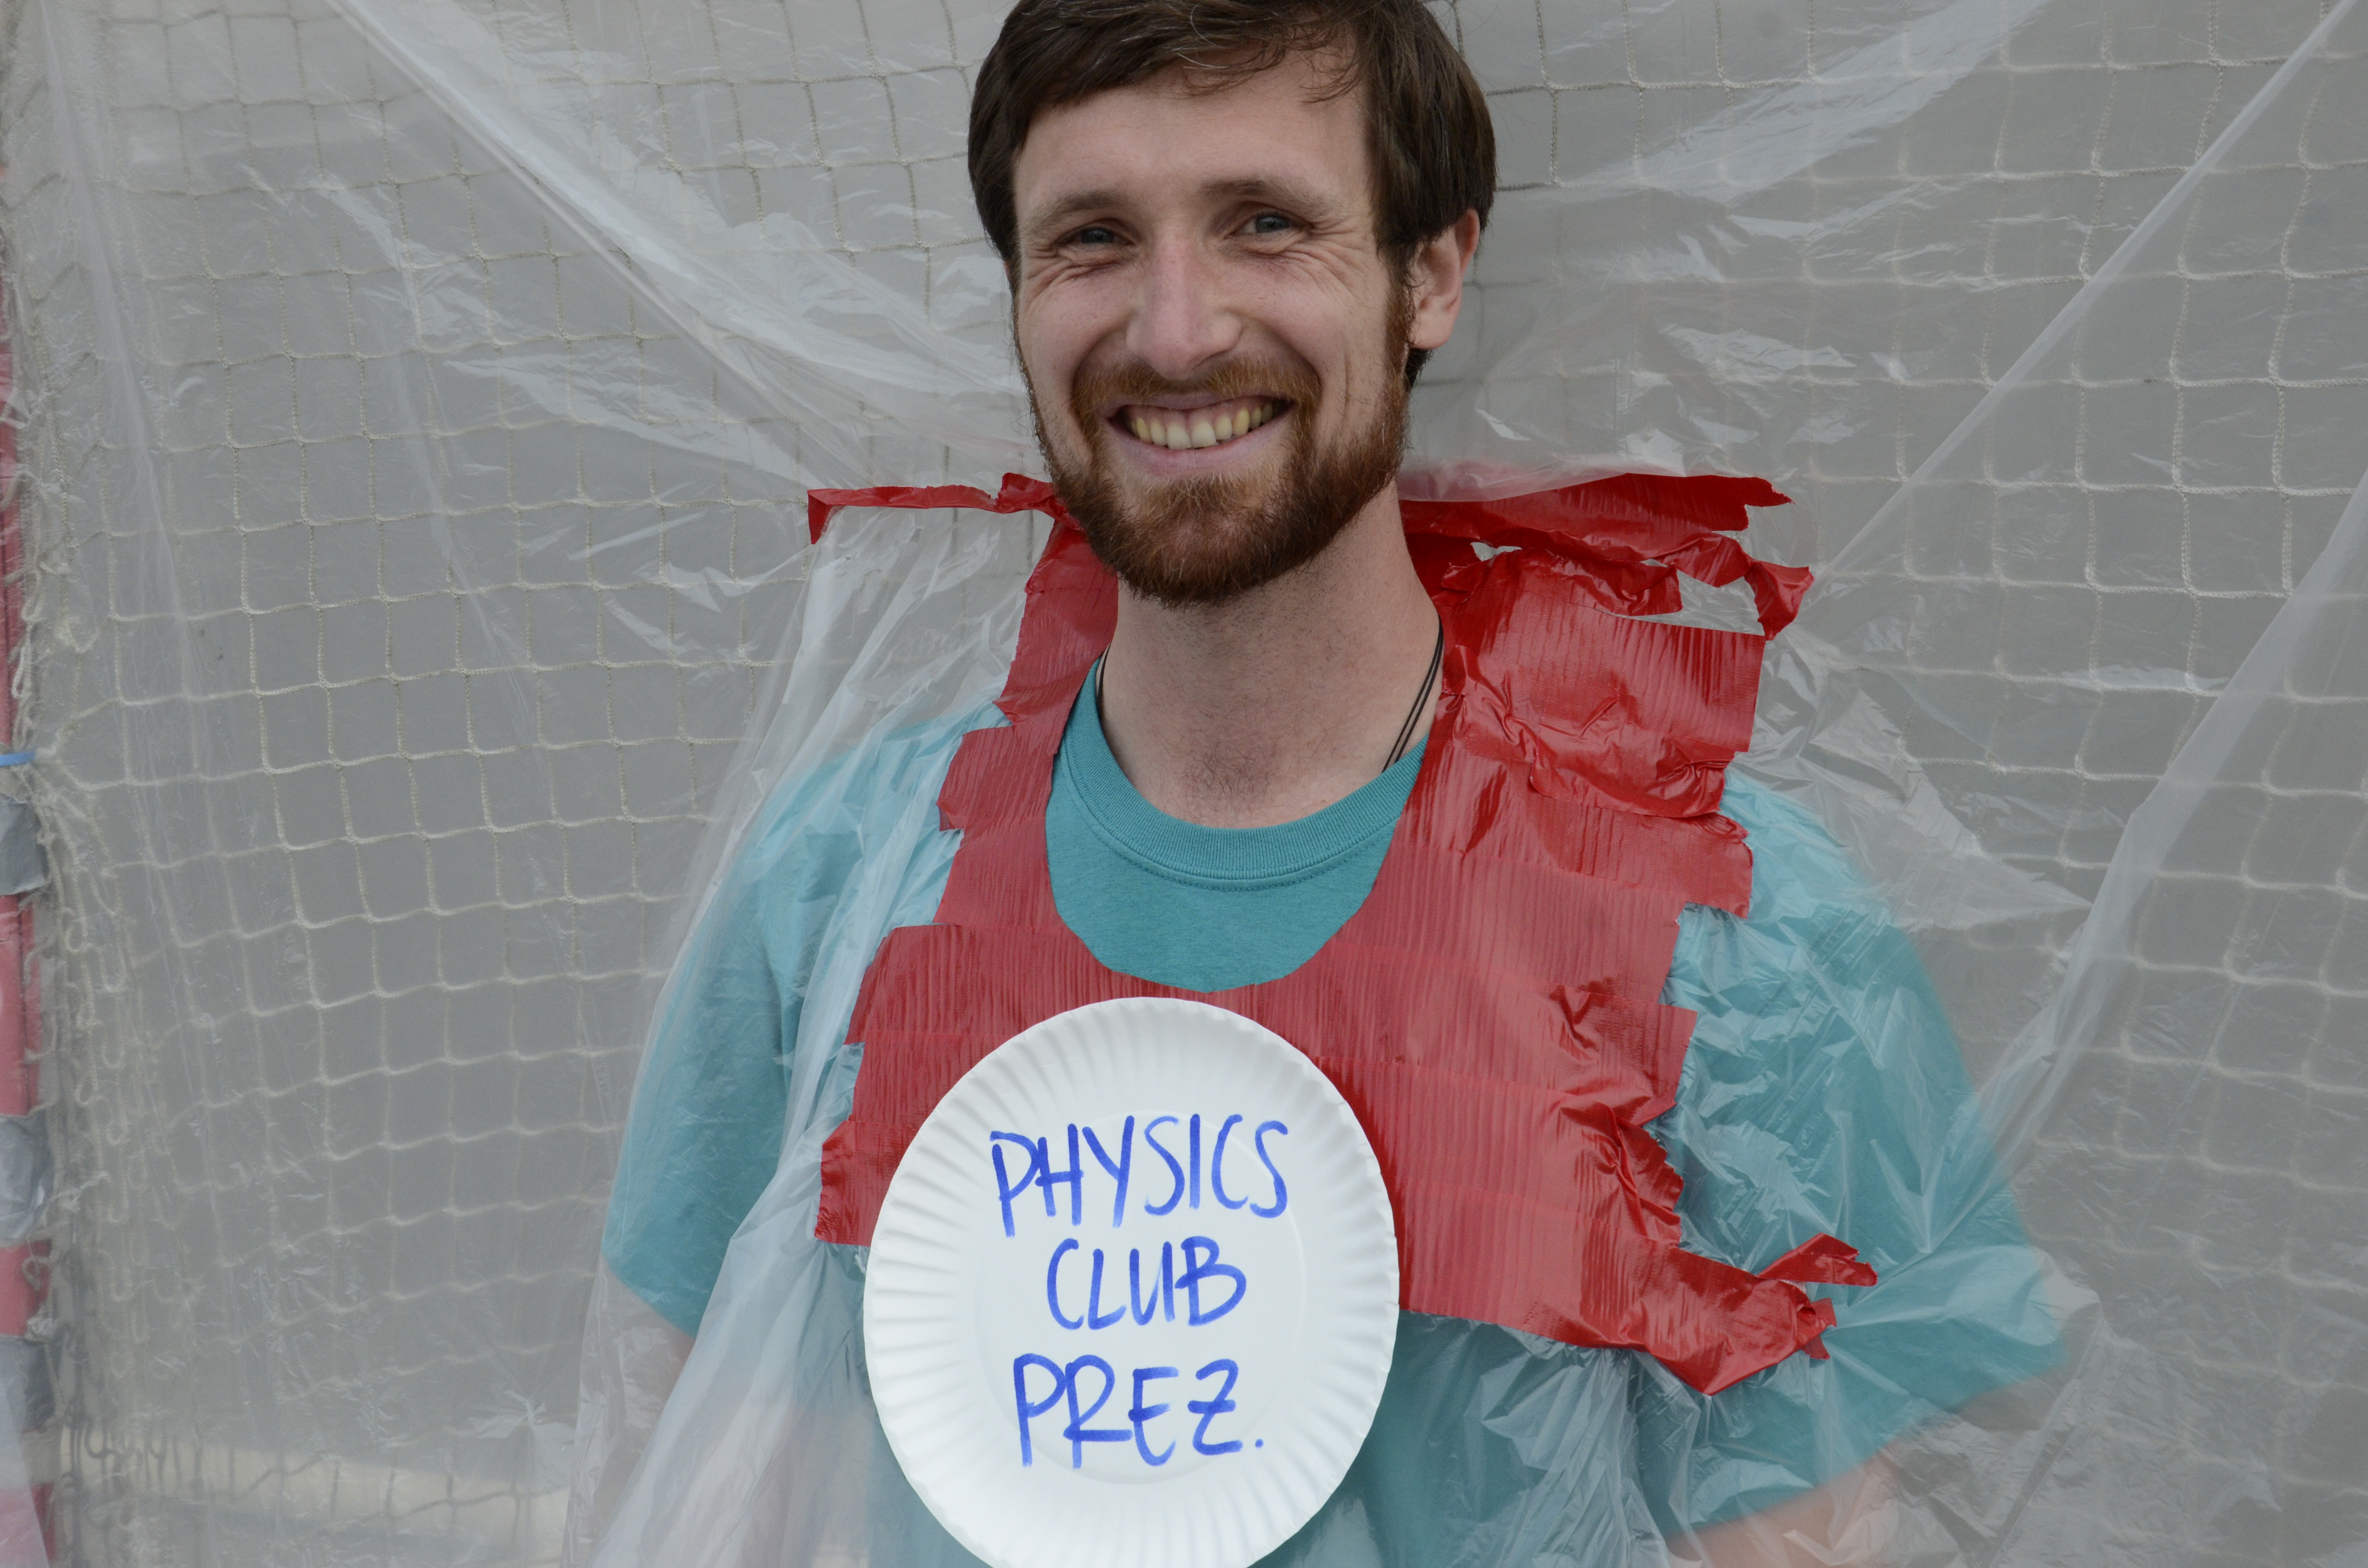 Physics club president sits with his head sticking out out of a plastic sheet for Pi Day and wearing a sign that says "Physics Club Prez"